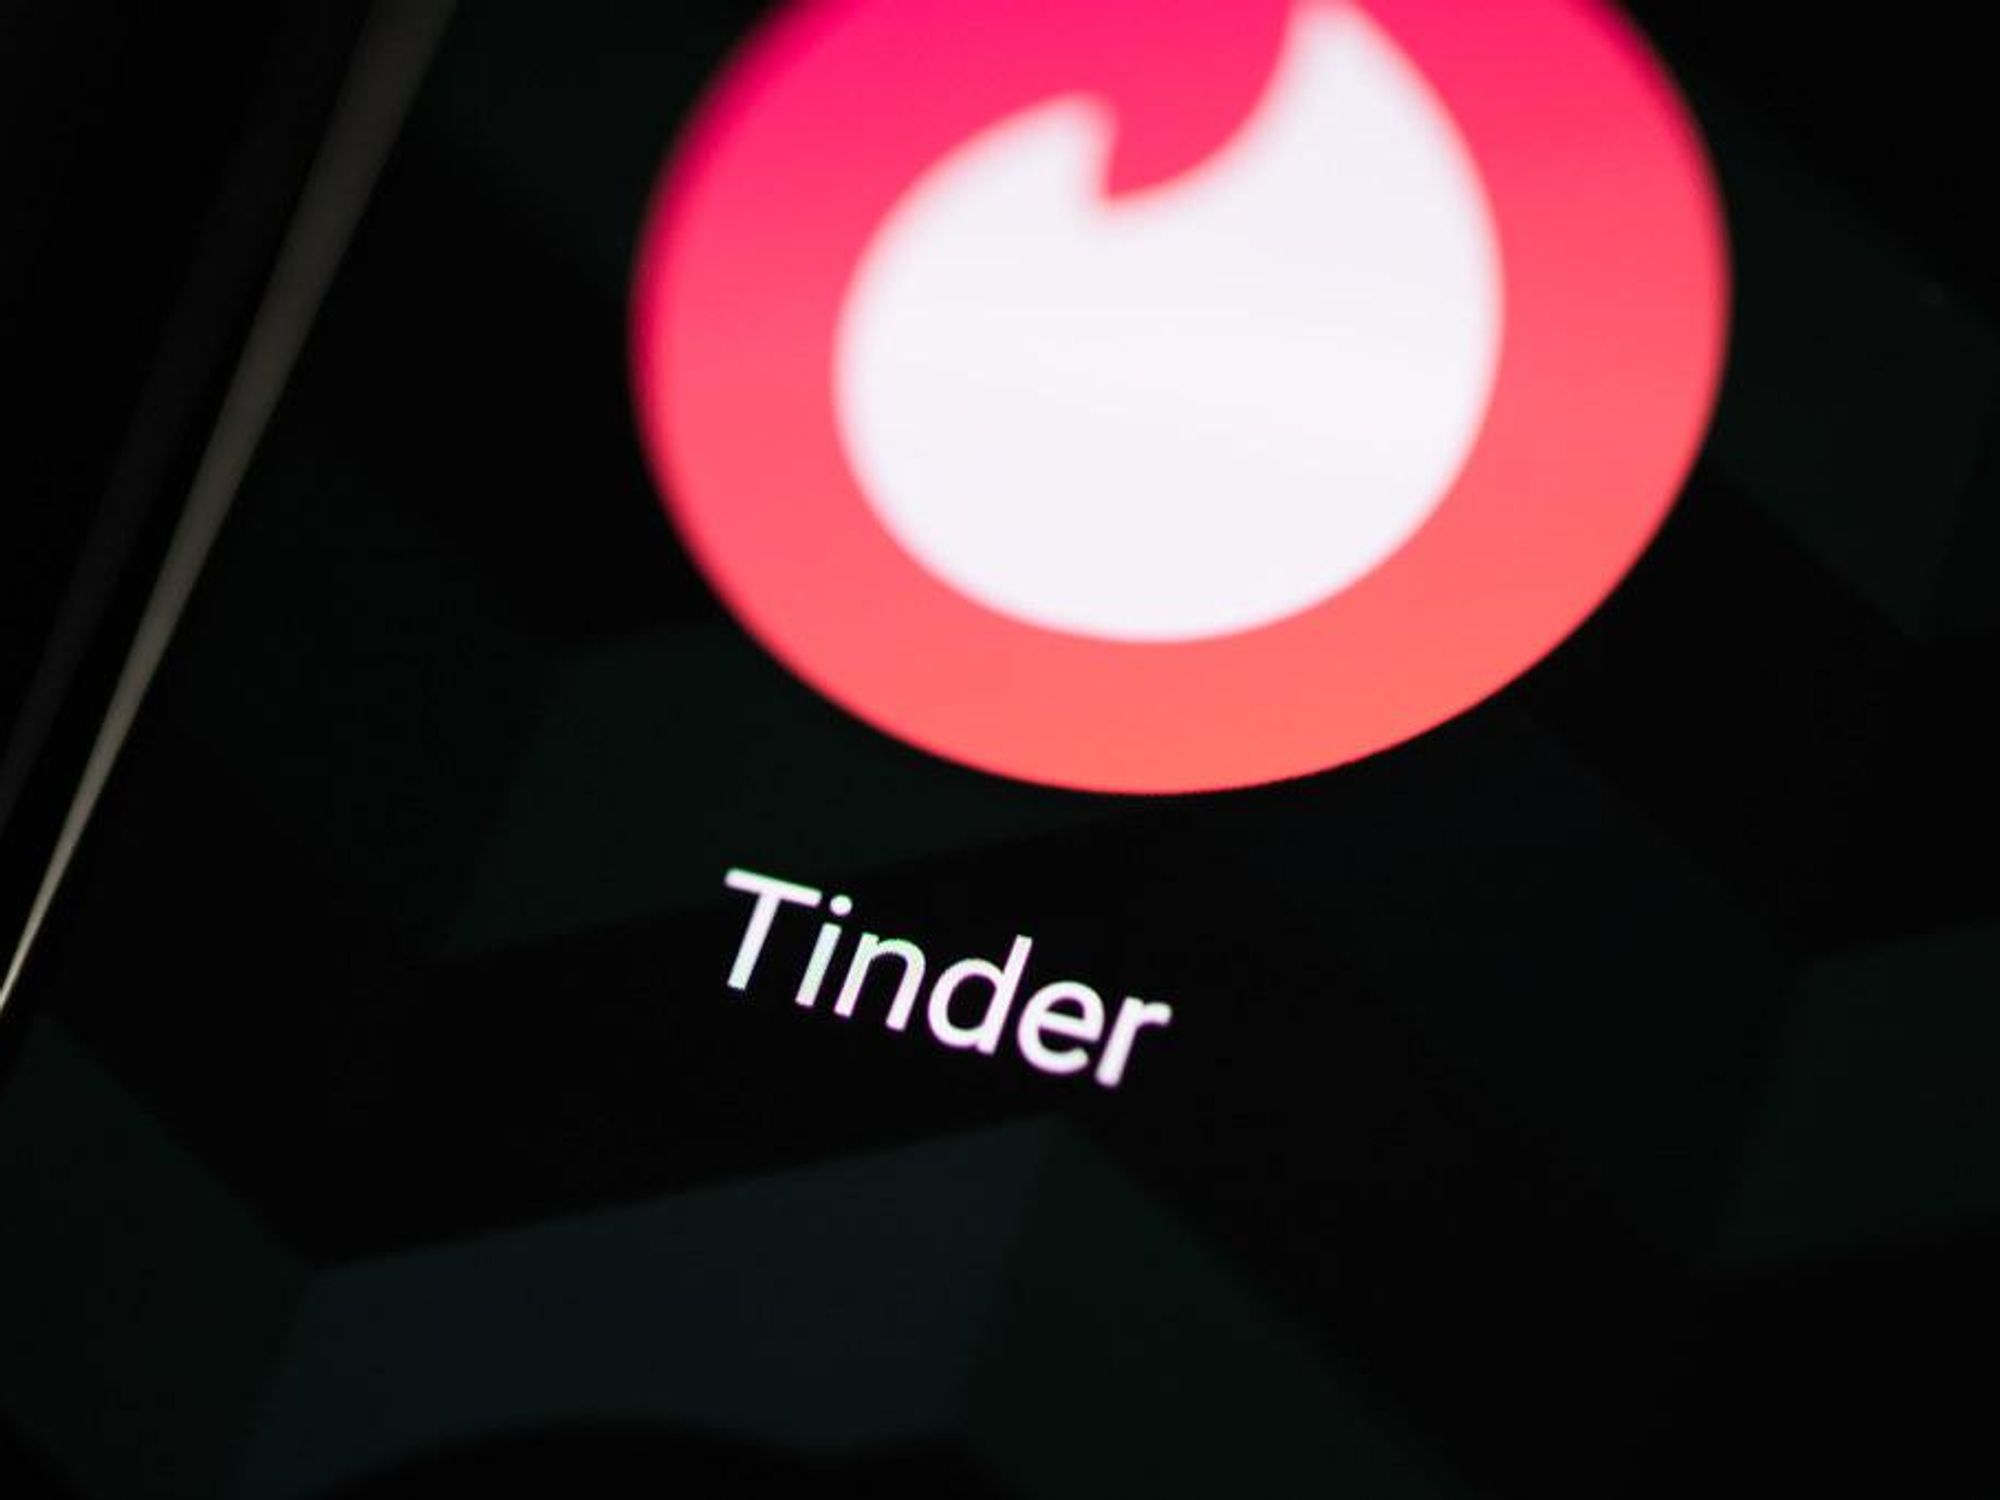 Tinder Is Bringing Back the 'Blind Date' Via New App Feature